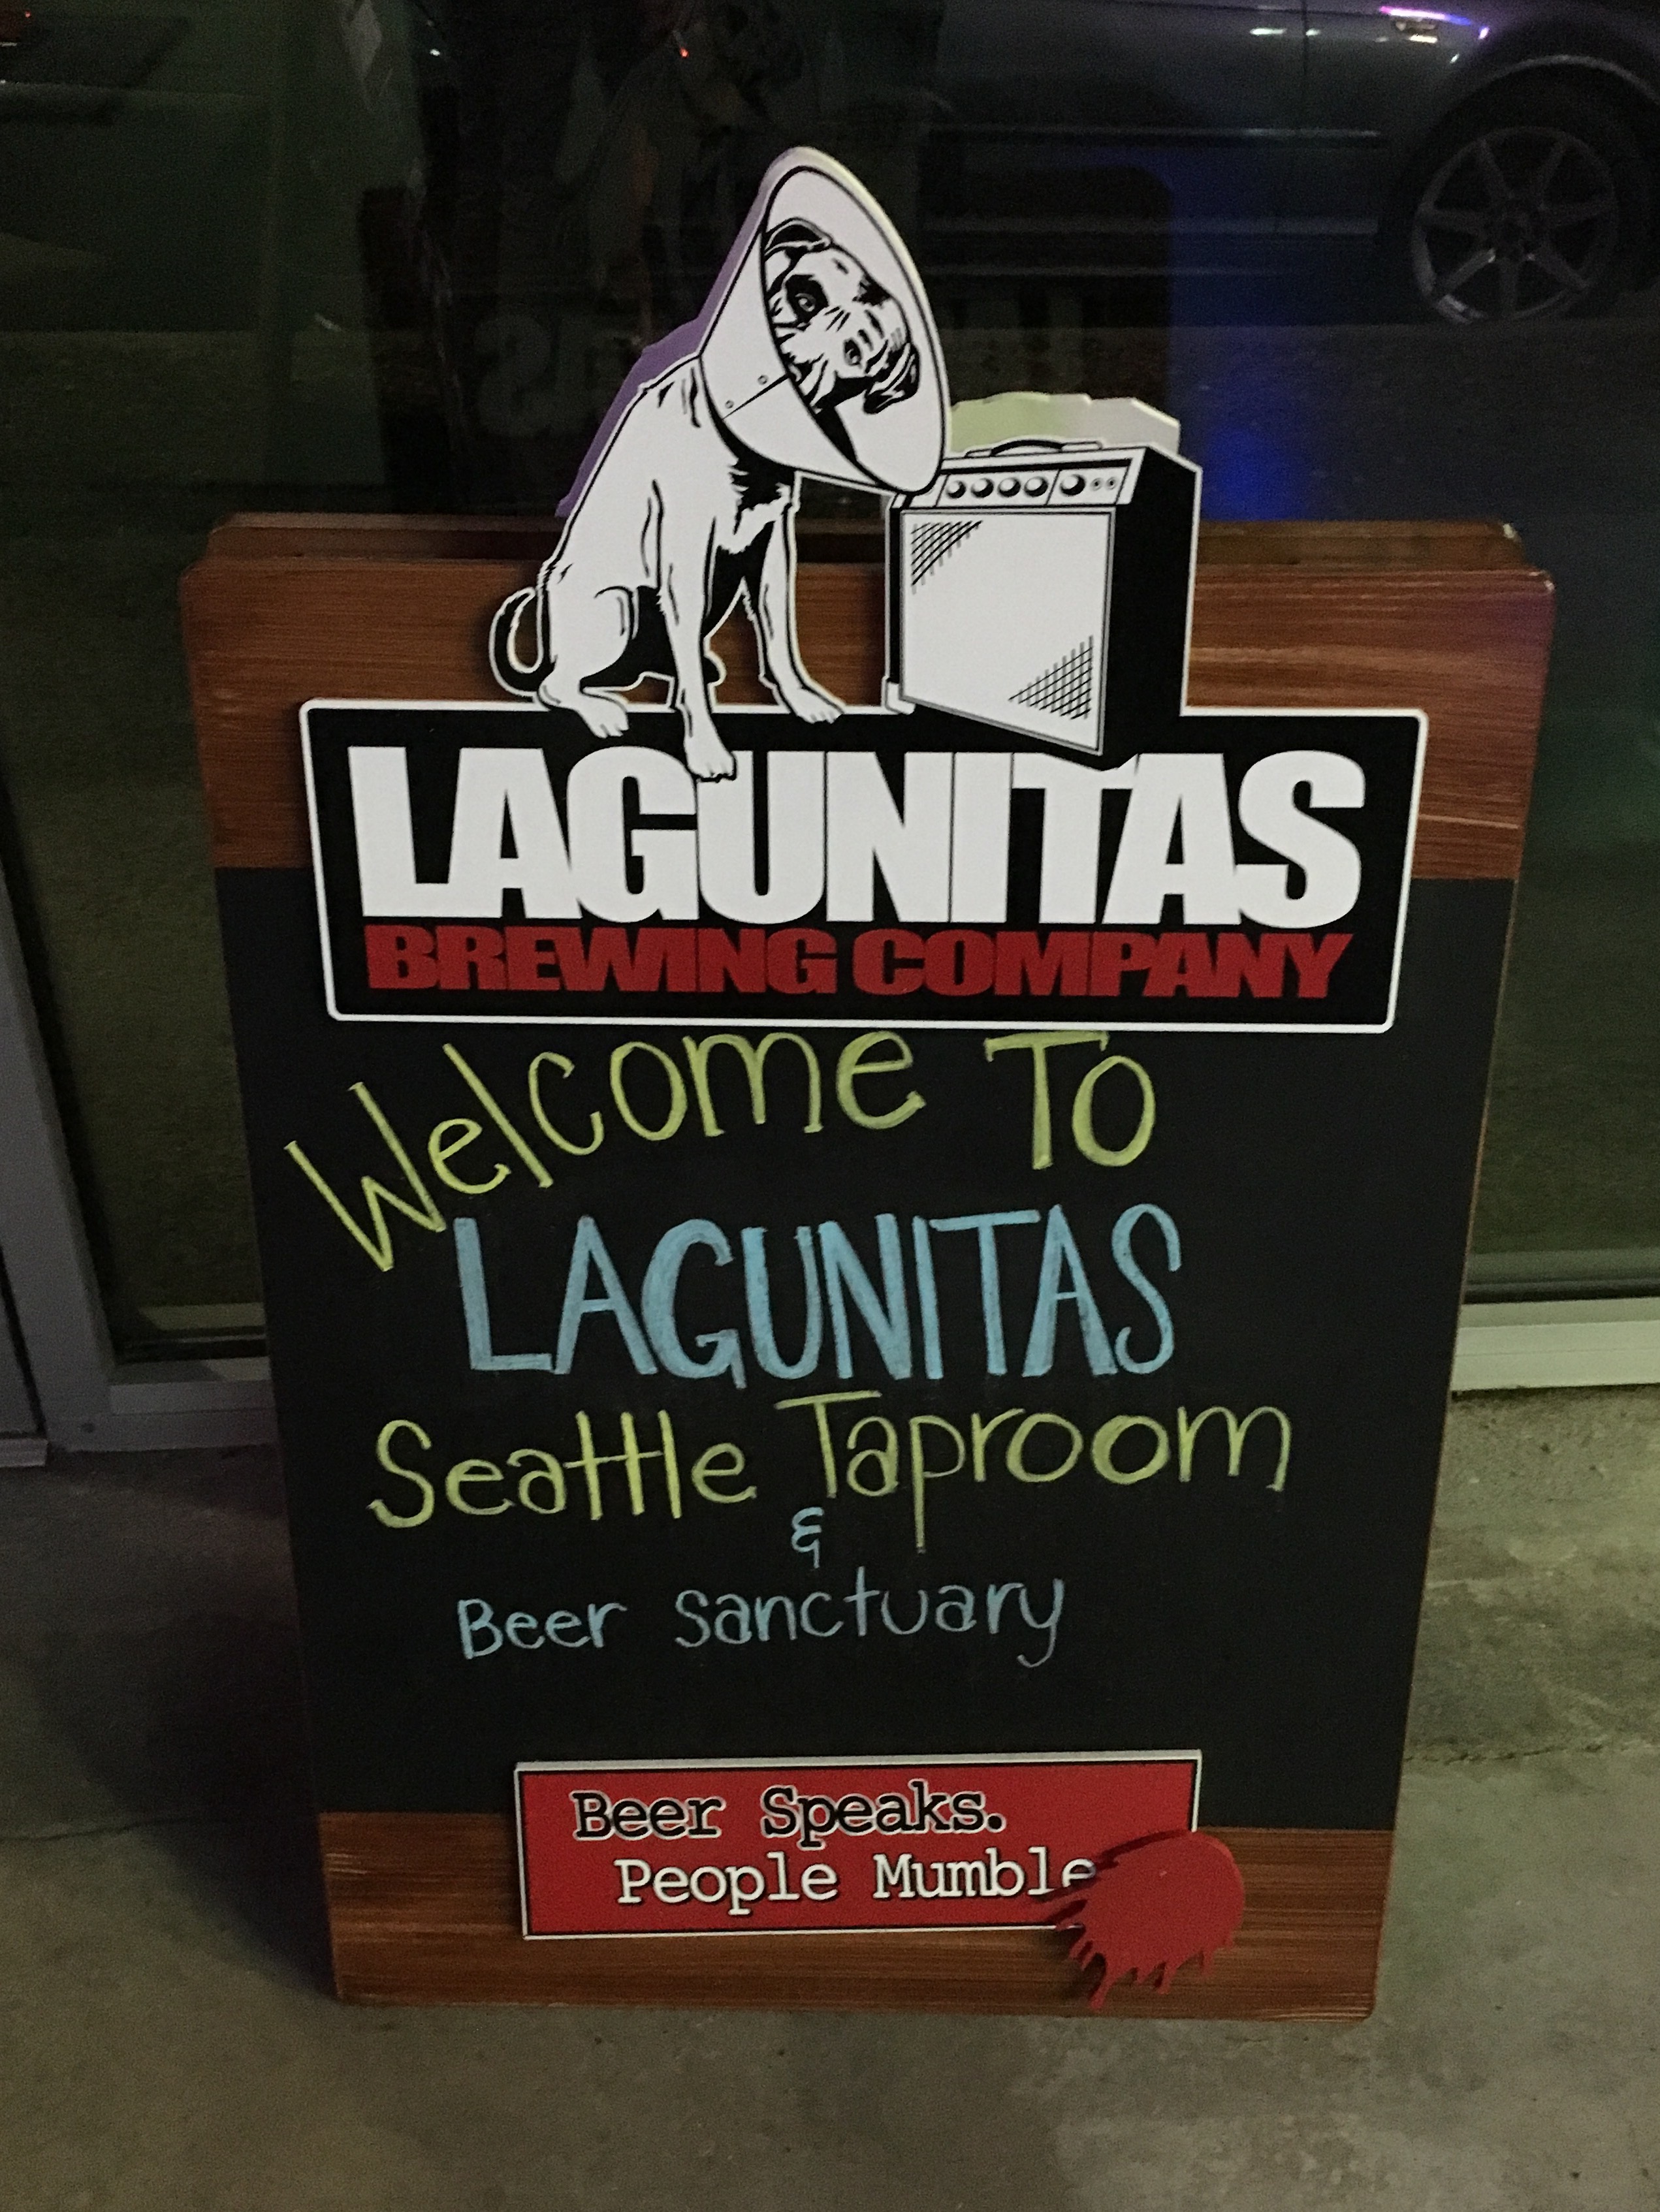 Lagunitas Seattle Taproom took over the vacant space left behind from Hilliards in Seattle's Ballard neighborhood.